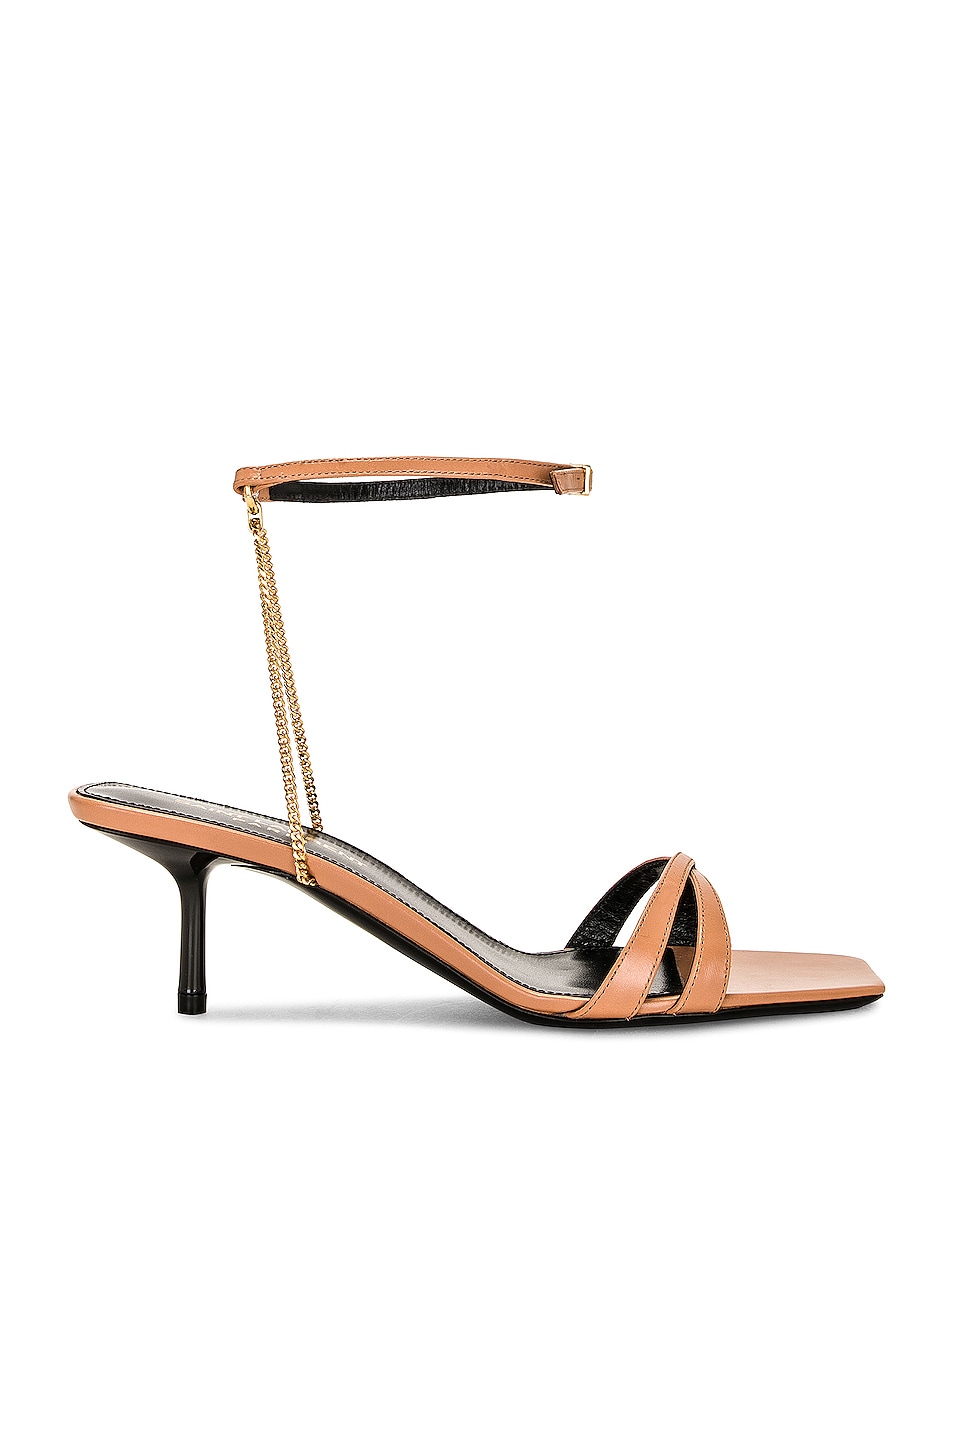 Image 1 of Saint Laurent Melody Sandal in Bisque